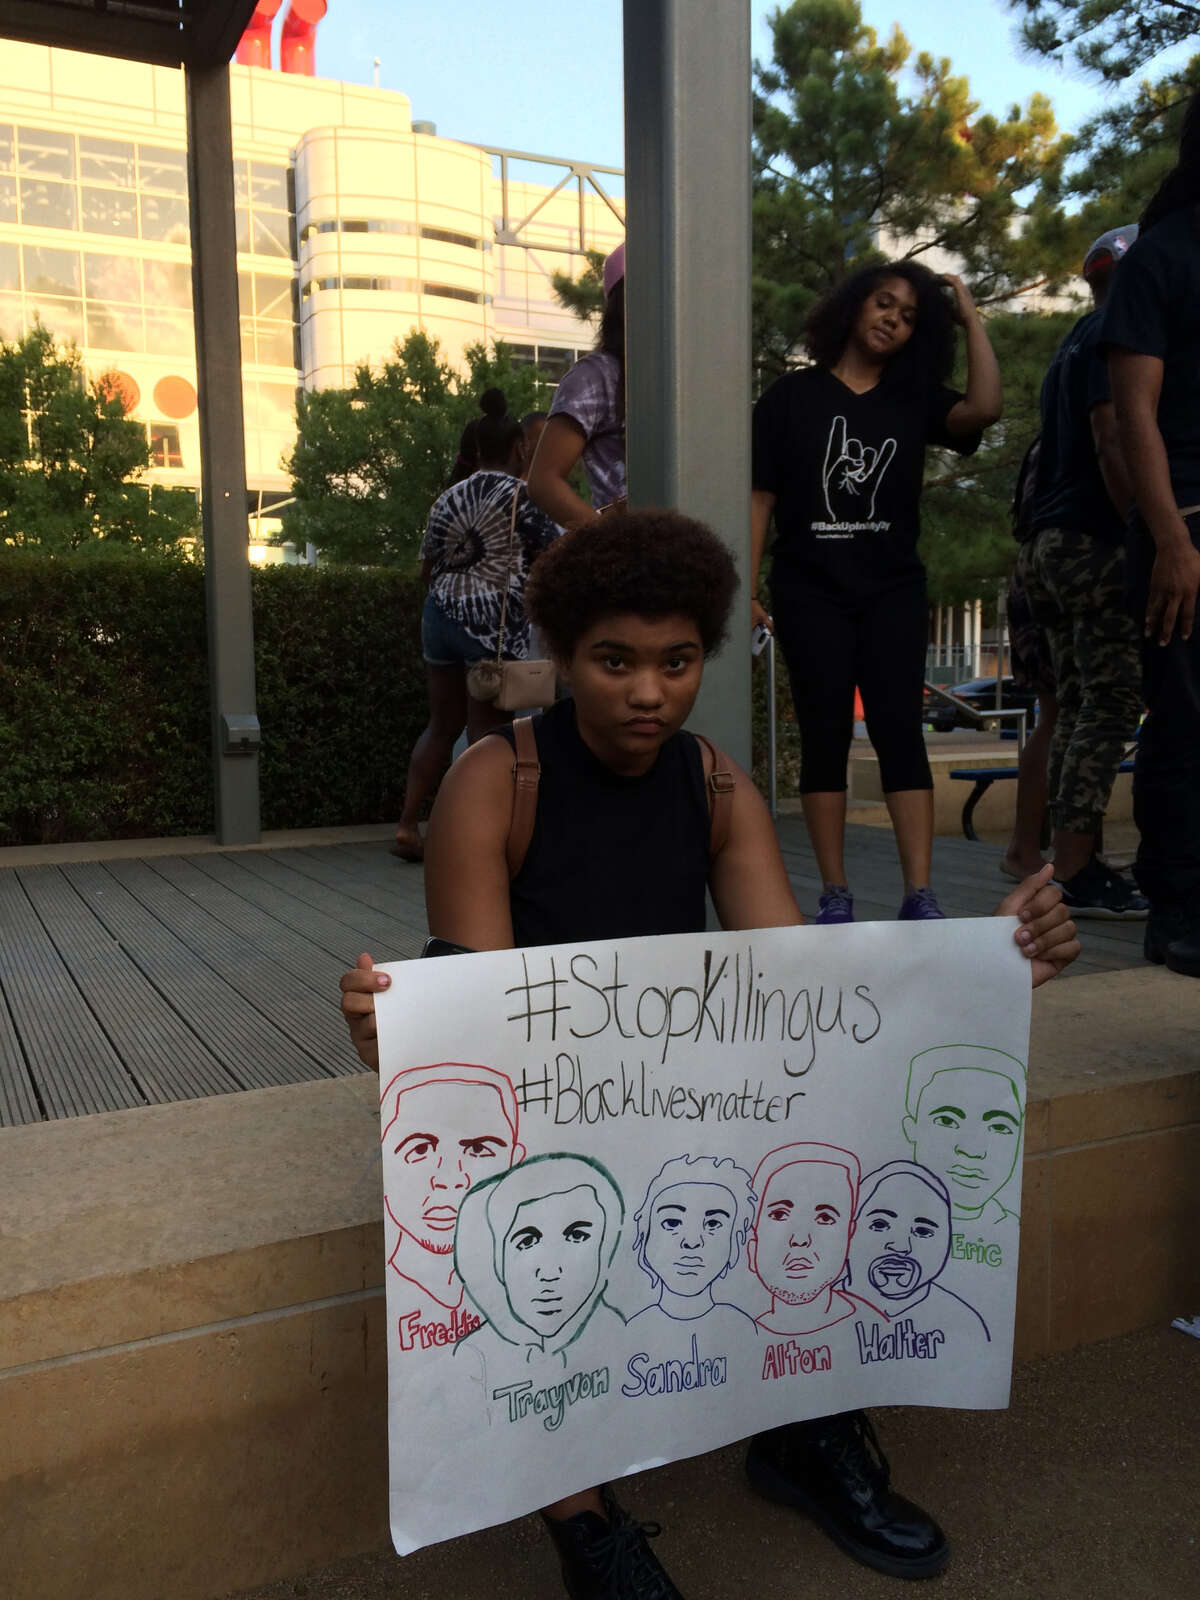 At the Discovery Green event, Angelica McGinnis, 17, shows a sign she drew that includes figures central to the Black Lives Matter movement protesting police shootings of minorities. Of the gathering, she said, "I feel like this is a good start."